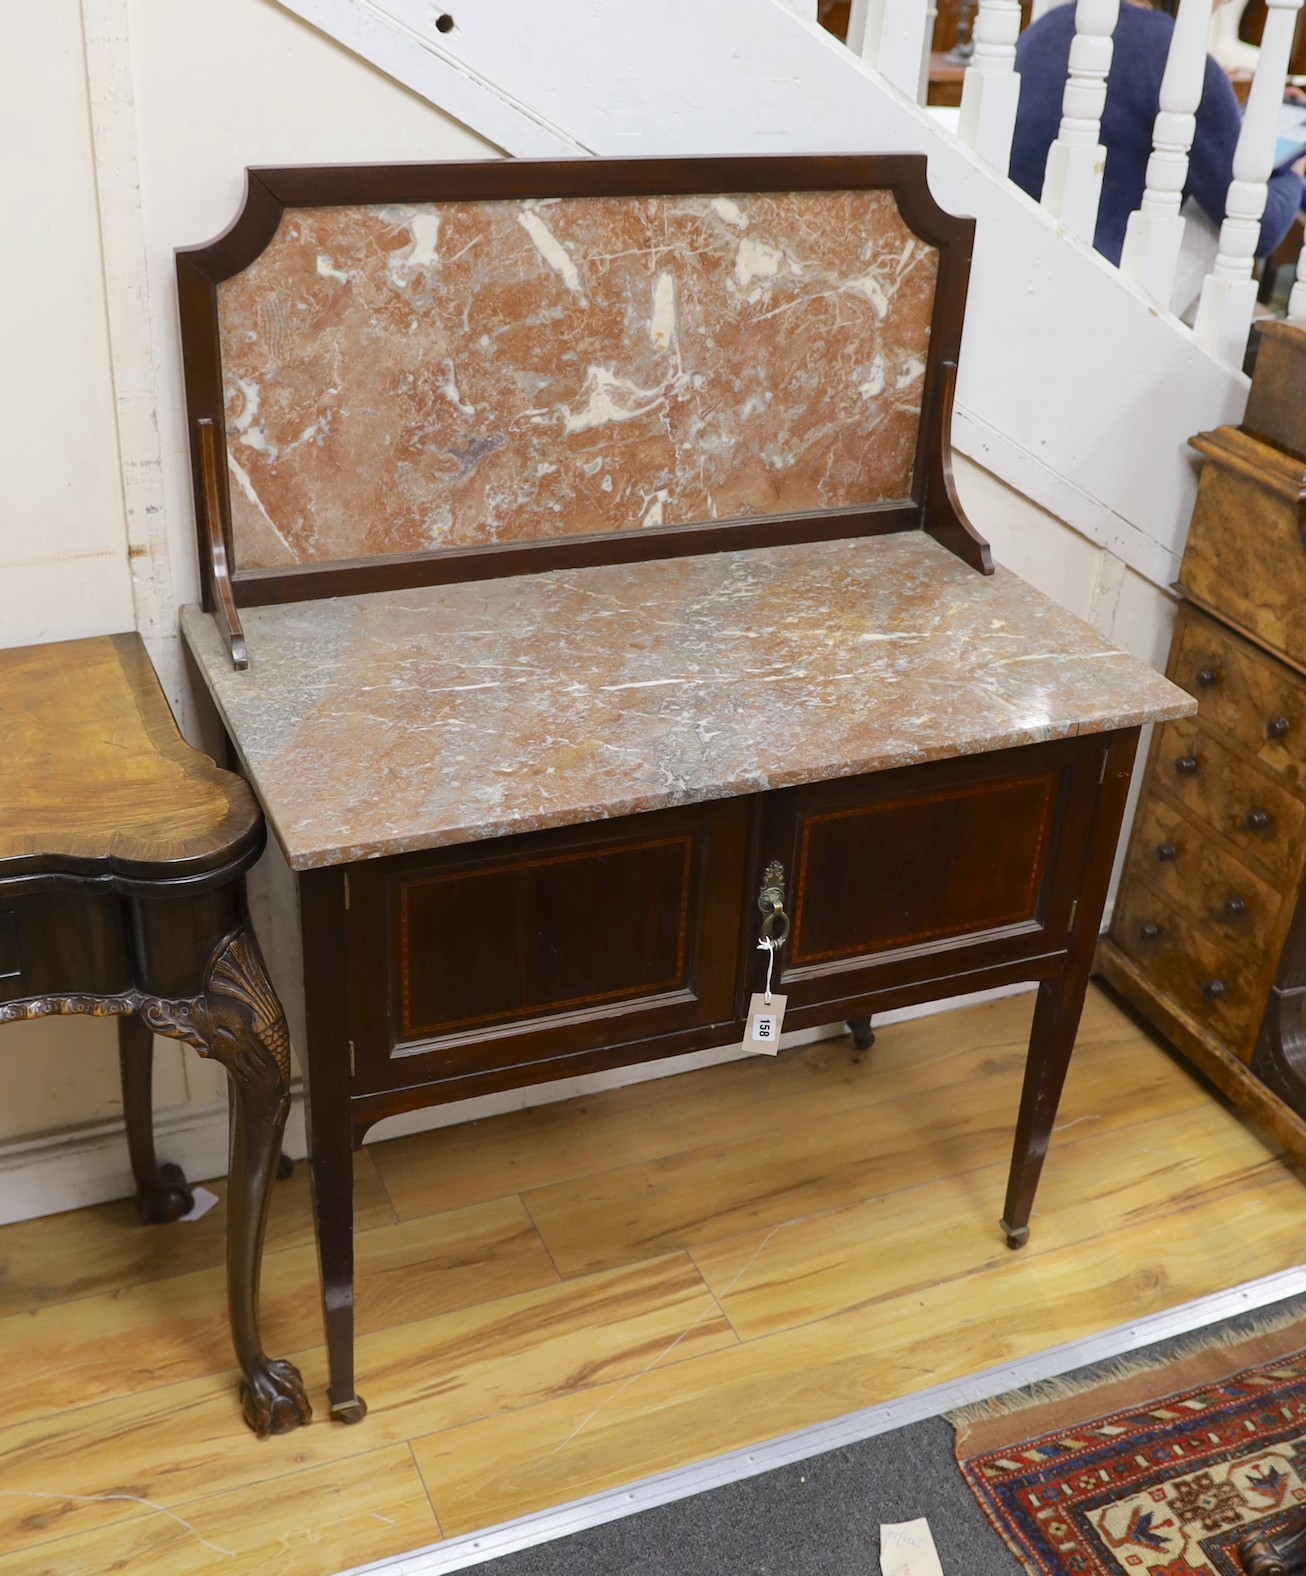 An Edwardian mahogany marble topped washstand, width 91cm, depth 51cm, height 122cm